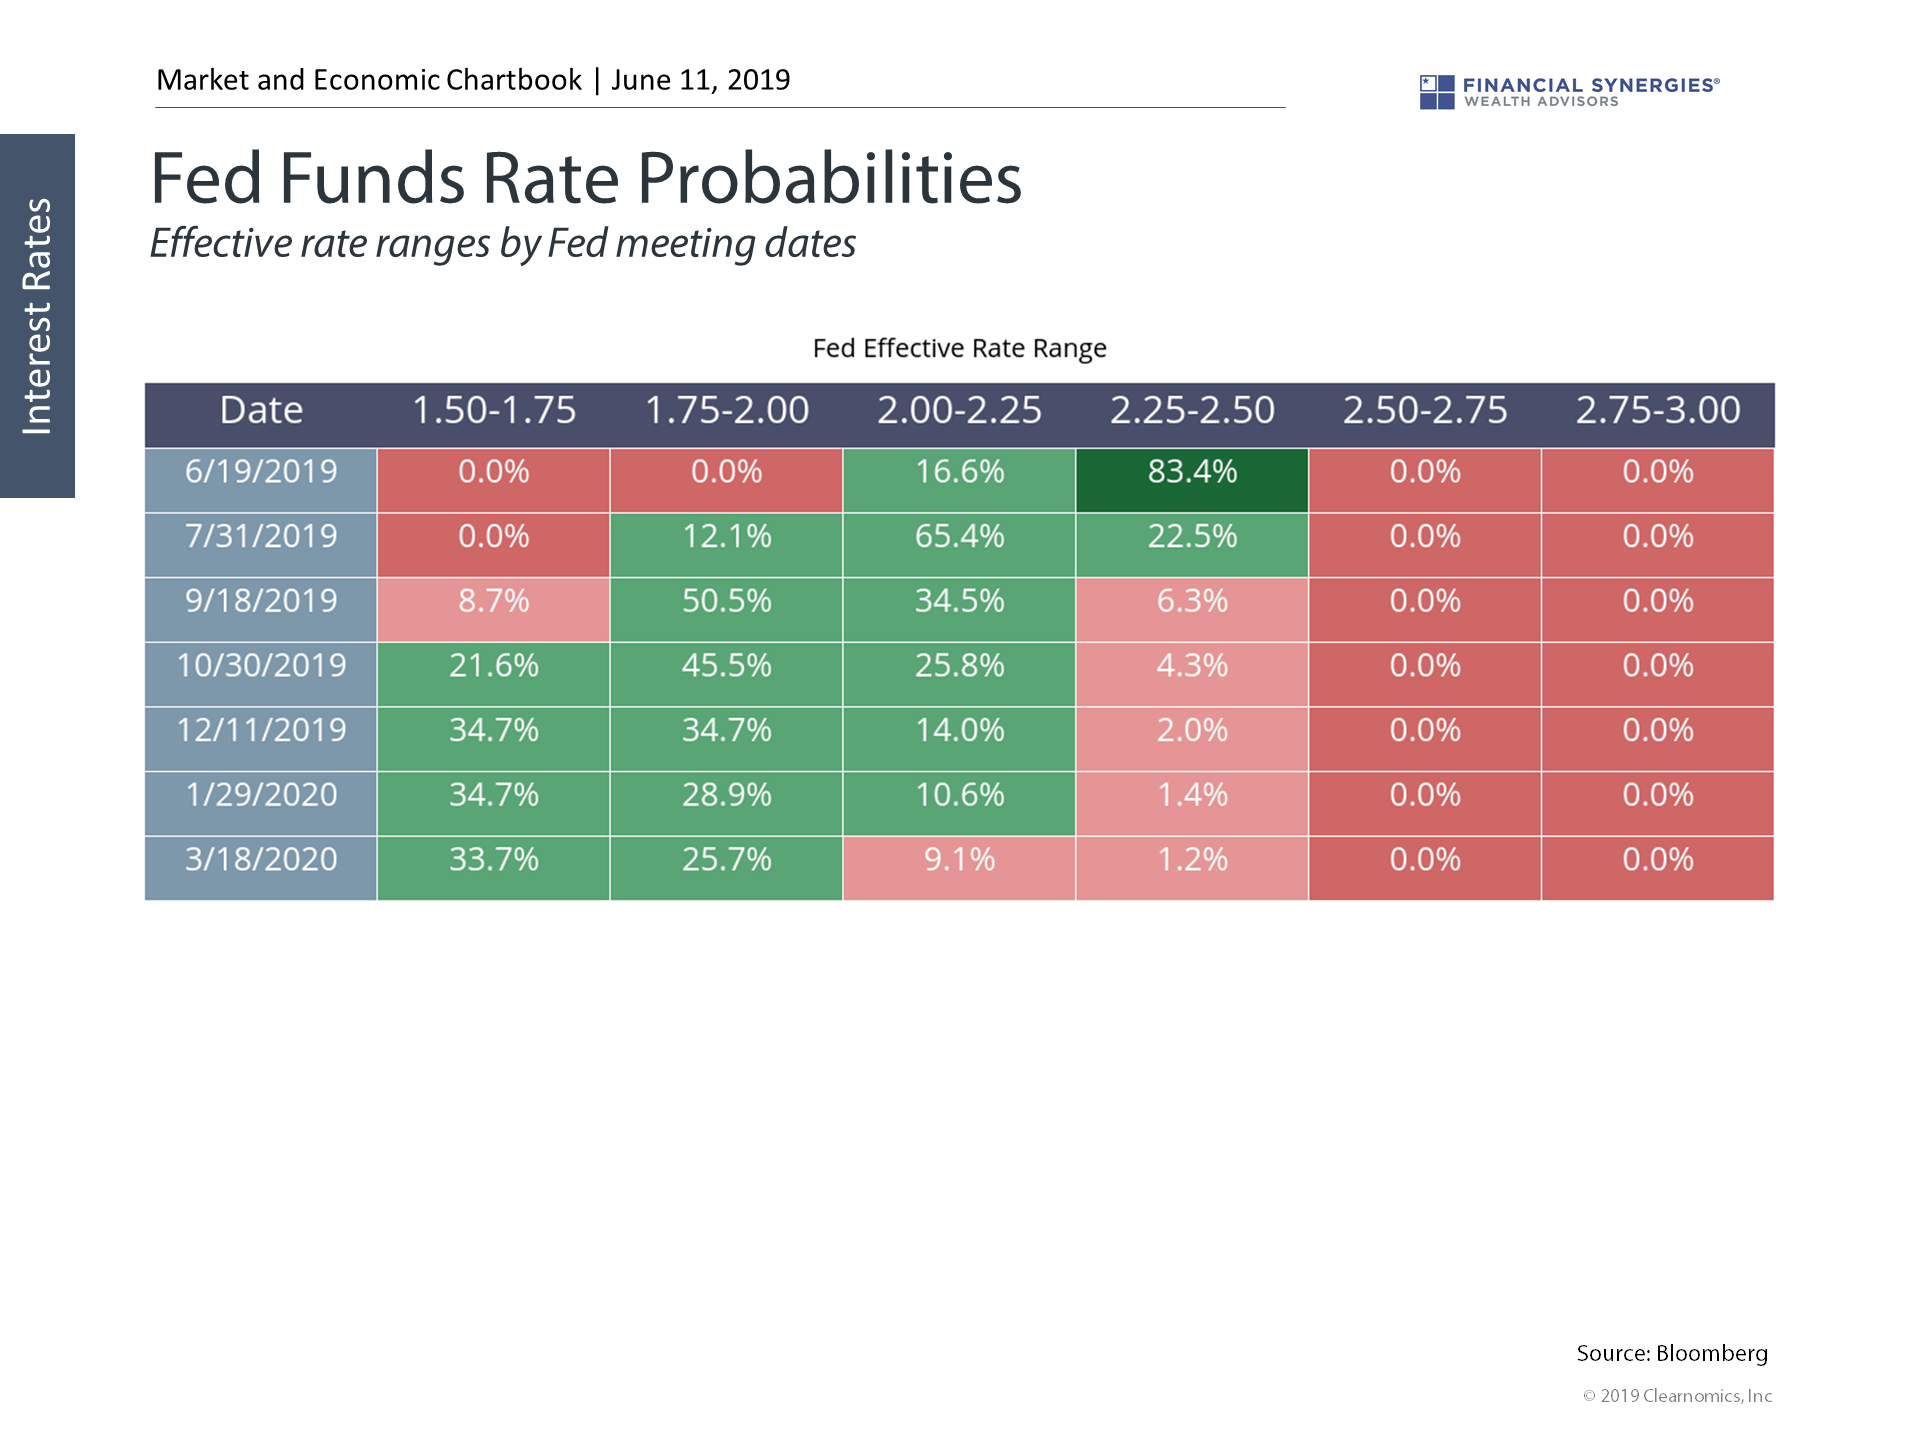 Fed funds rate probabilities